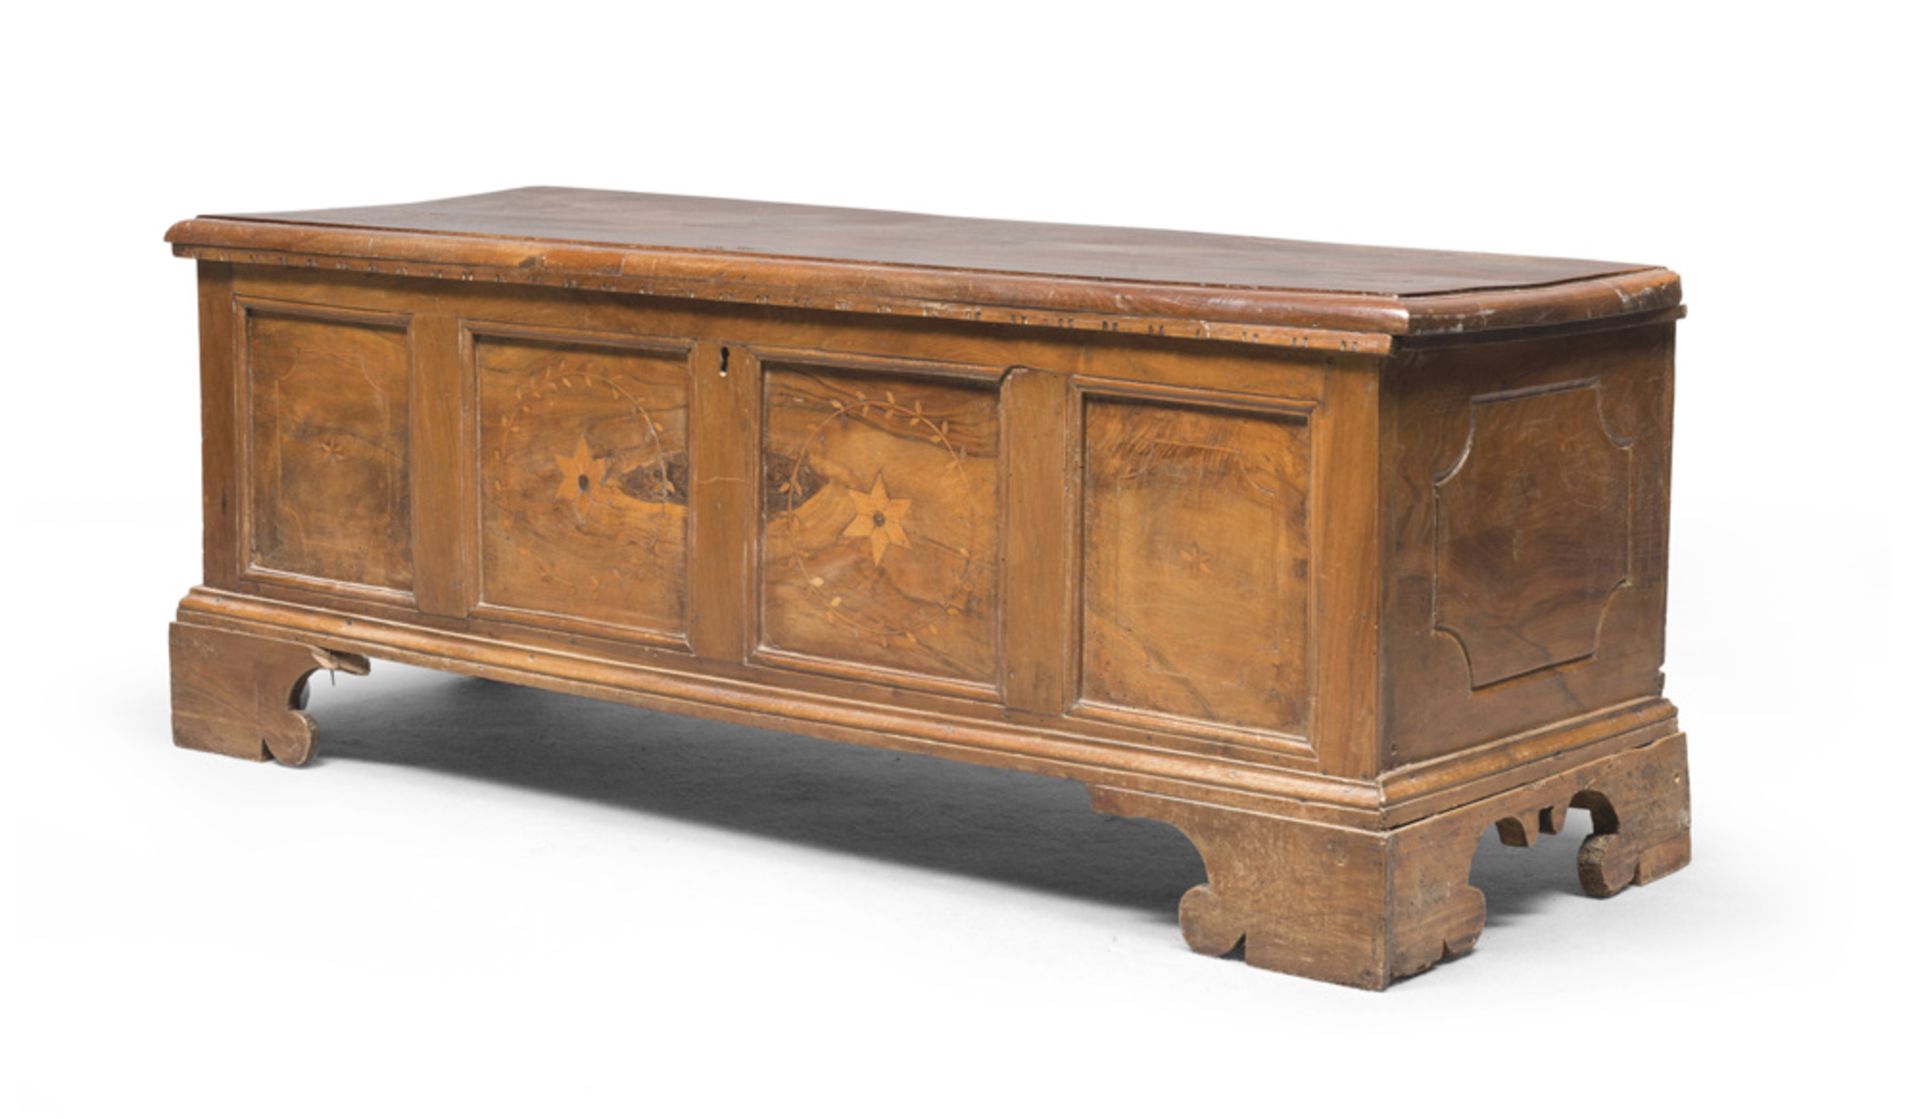 WALNUT CHEST, CENTRAL ITALY 18TH CENTURY with inlaid front, bracket feet Measures cm. 60 x 150 x 52.